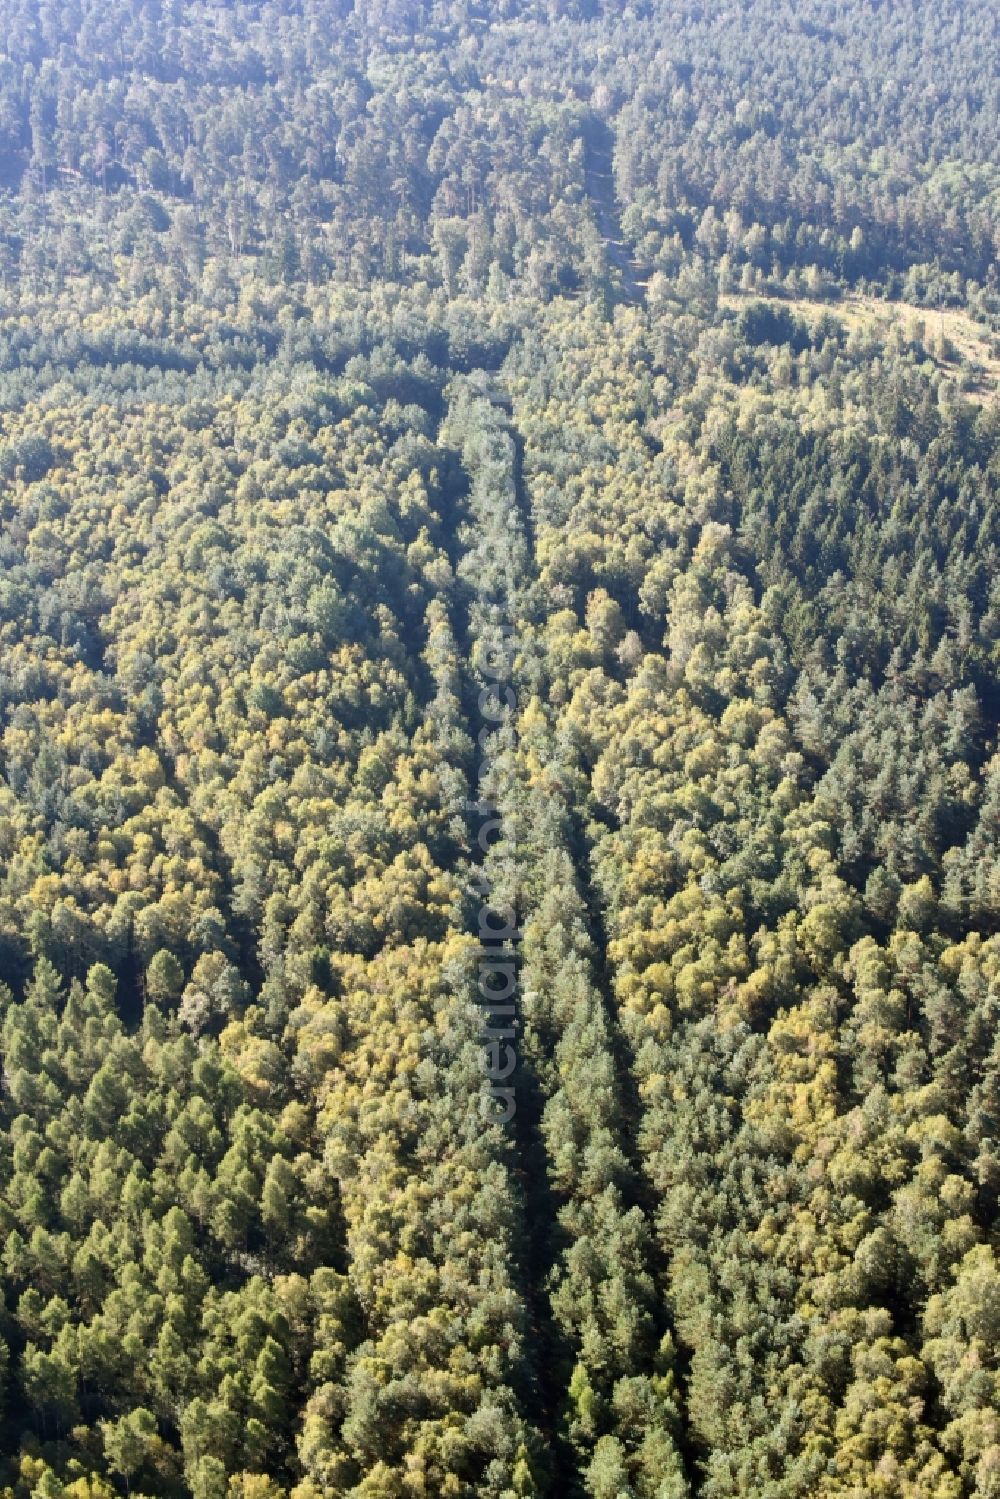 Aerial photograph Walbeck - Route course of the former inner-German border between the GDR German Democratic Republic and the Federal Republic of Germany Federal Republic of Germany in a renatured forest near Walbeck in the state Saxony-Anhalt